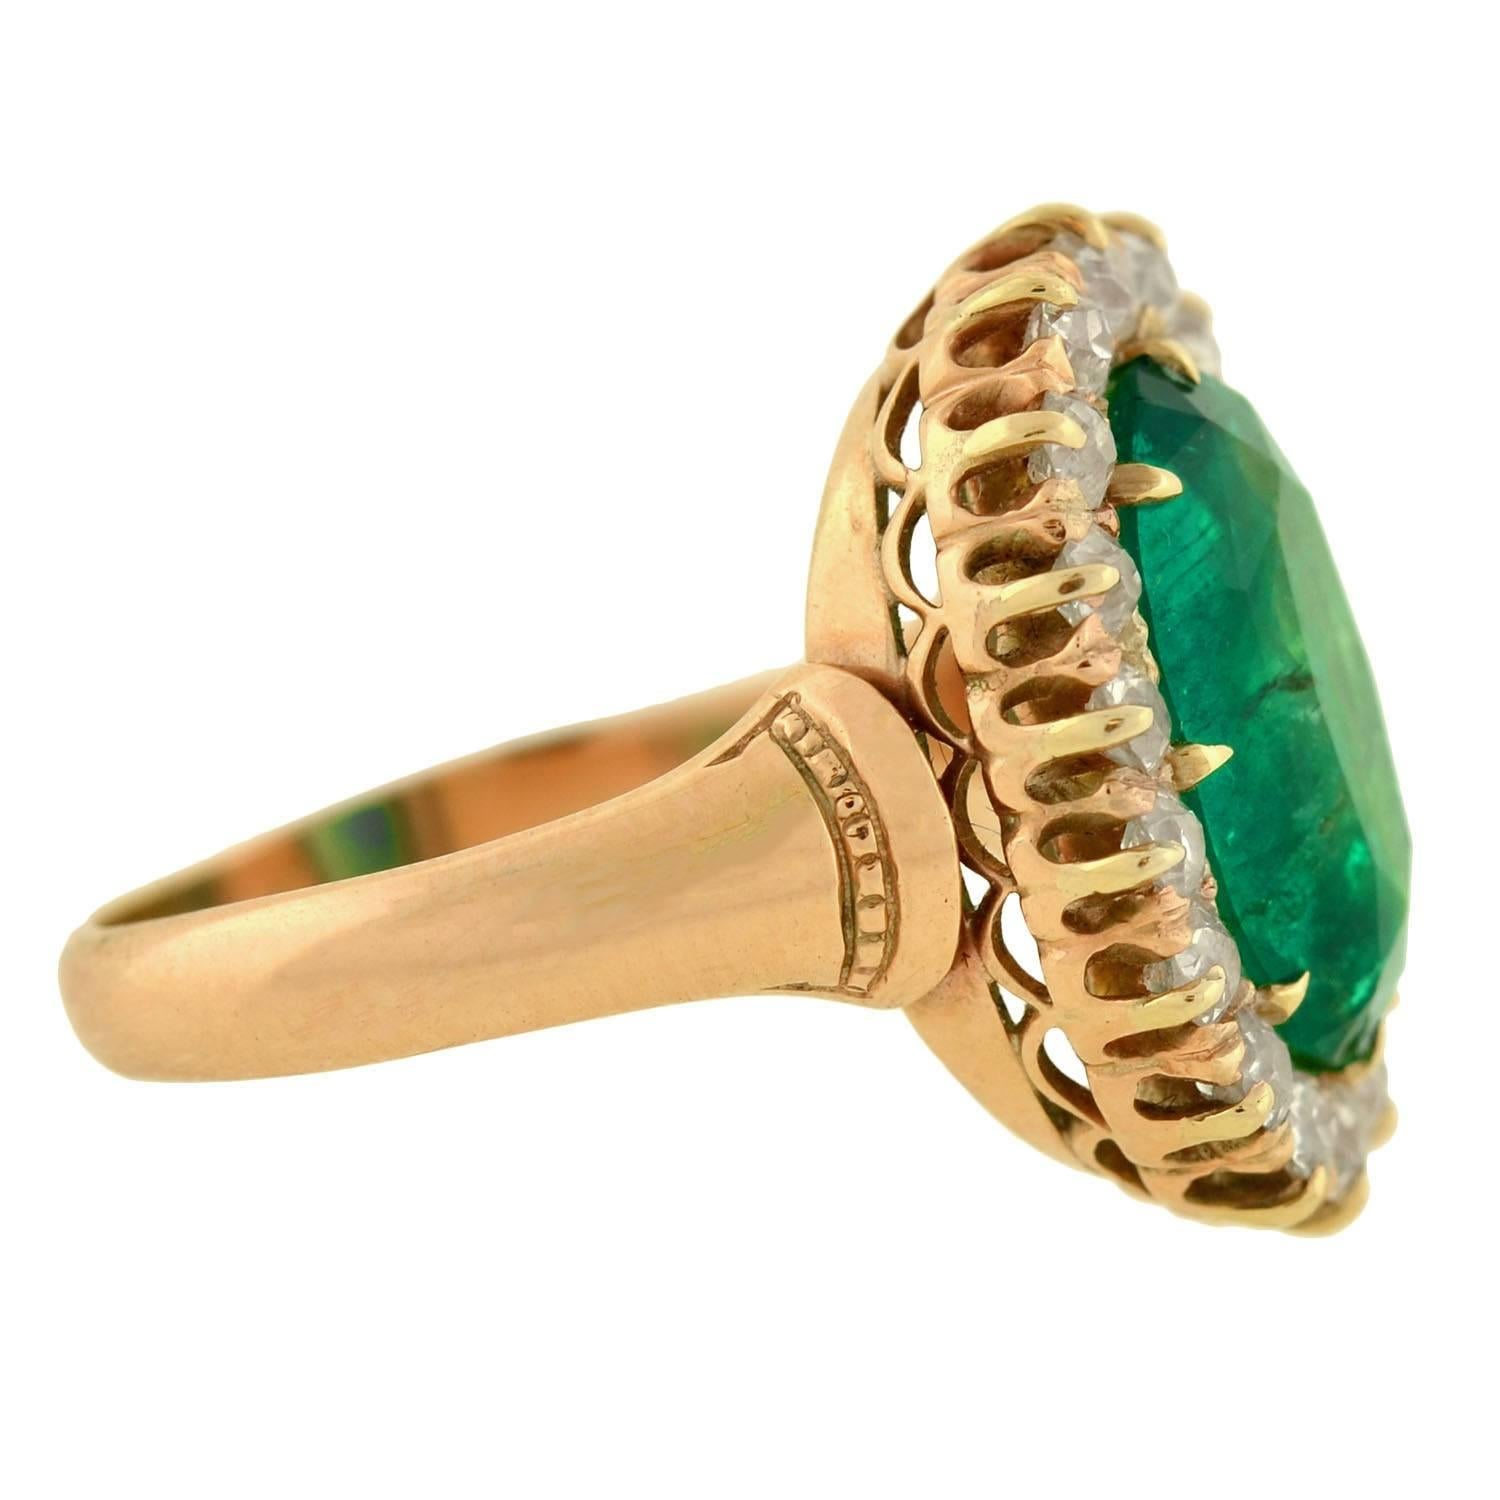 An absolutely exquisite natural emerald and diamond ring from the Victorian (ca1880) era! This wonderful piece has a a vibrant, faceted, emerald stone at its center which is surrounded by 18 sparkling, old European Cut diamonds. The diamonds are